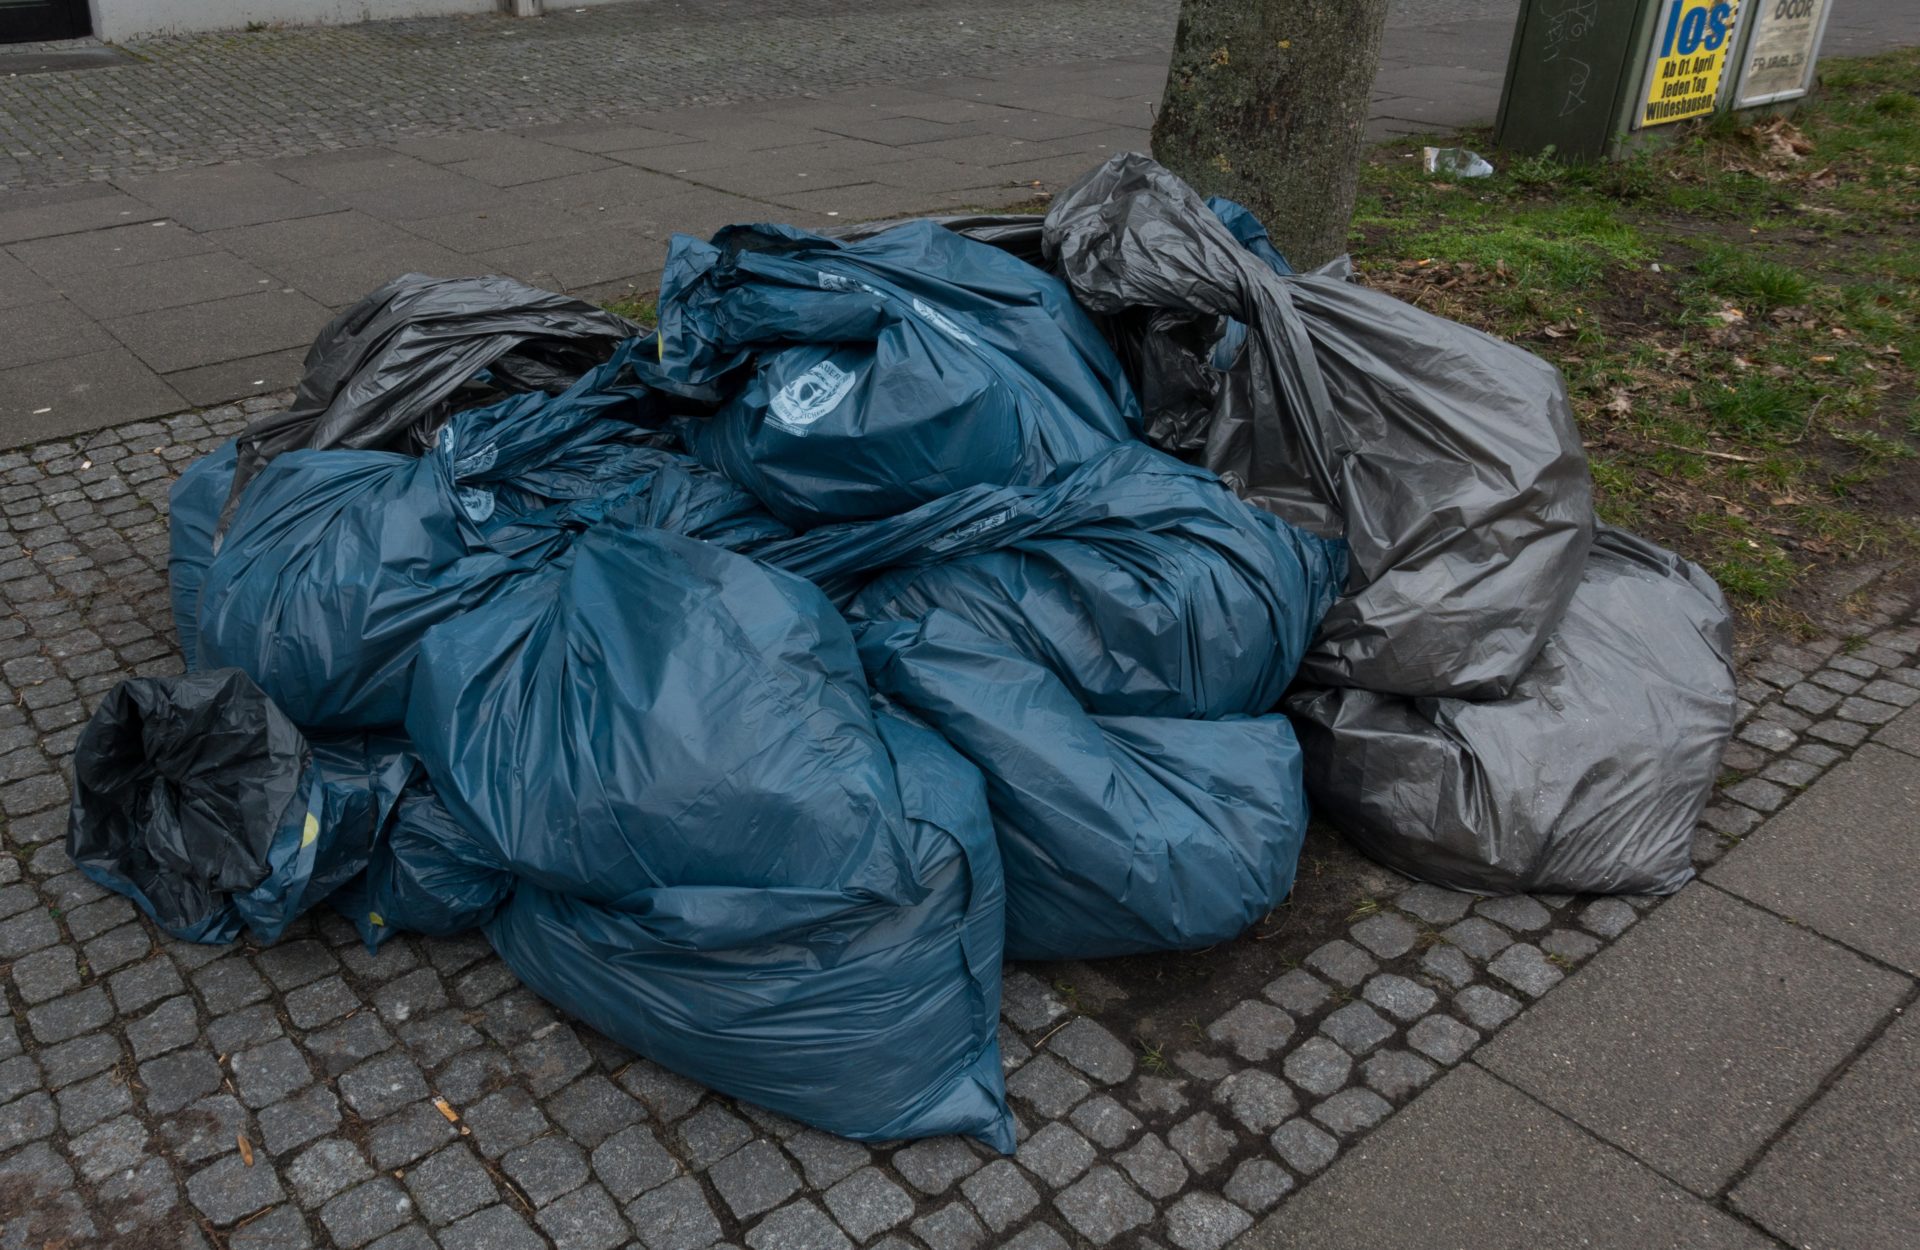 Full rubbish bags on a pavement.